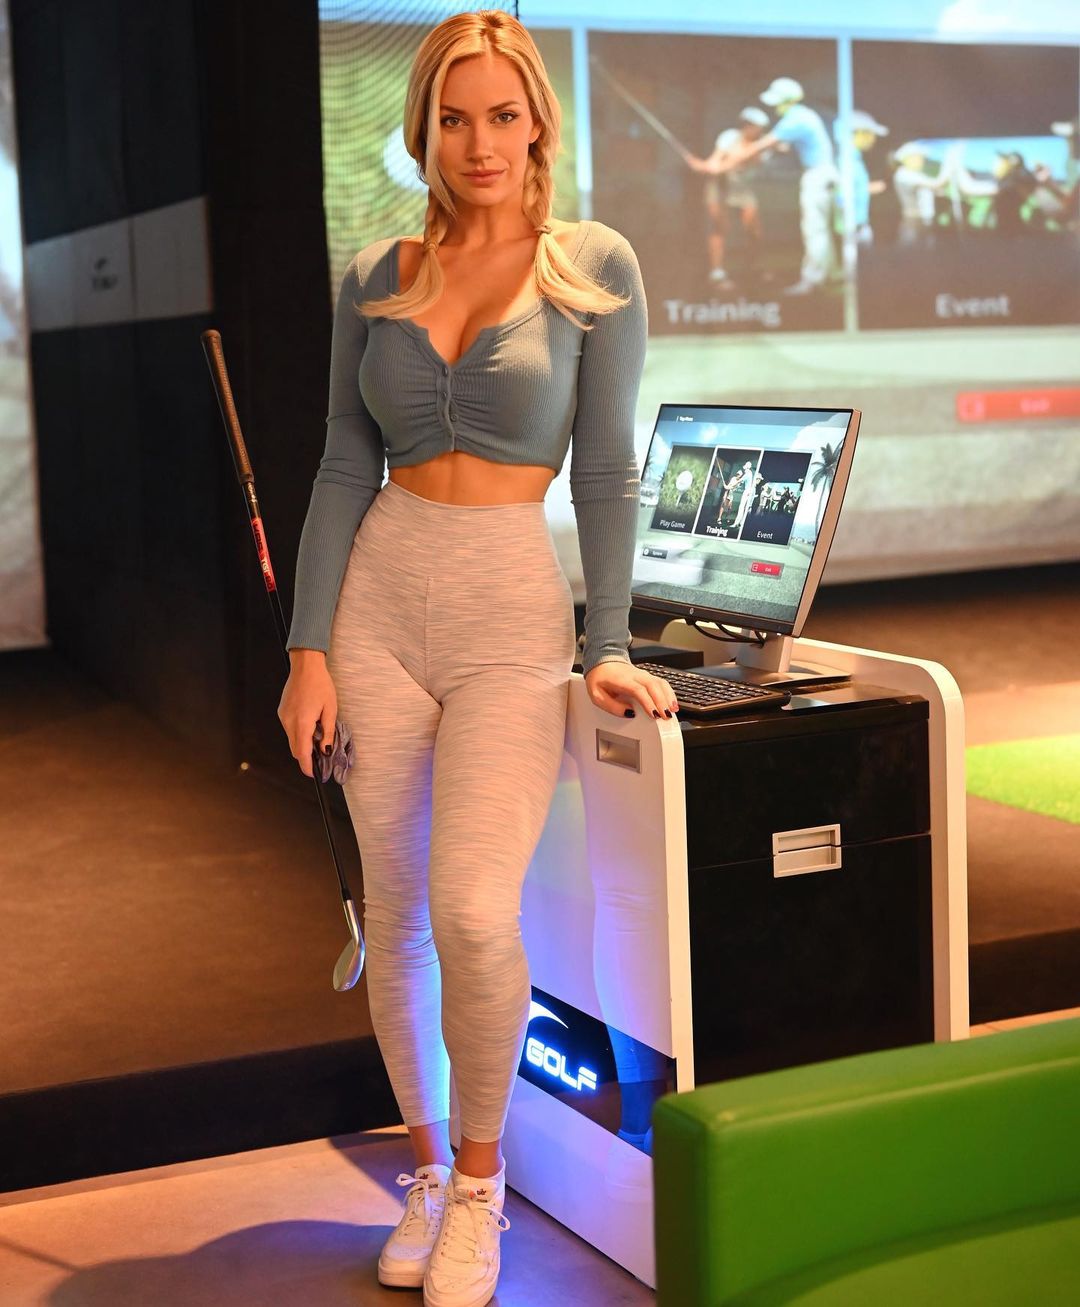 Hot Paige Spiranac Plays Golf In The Bahamas.